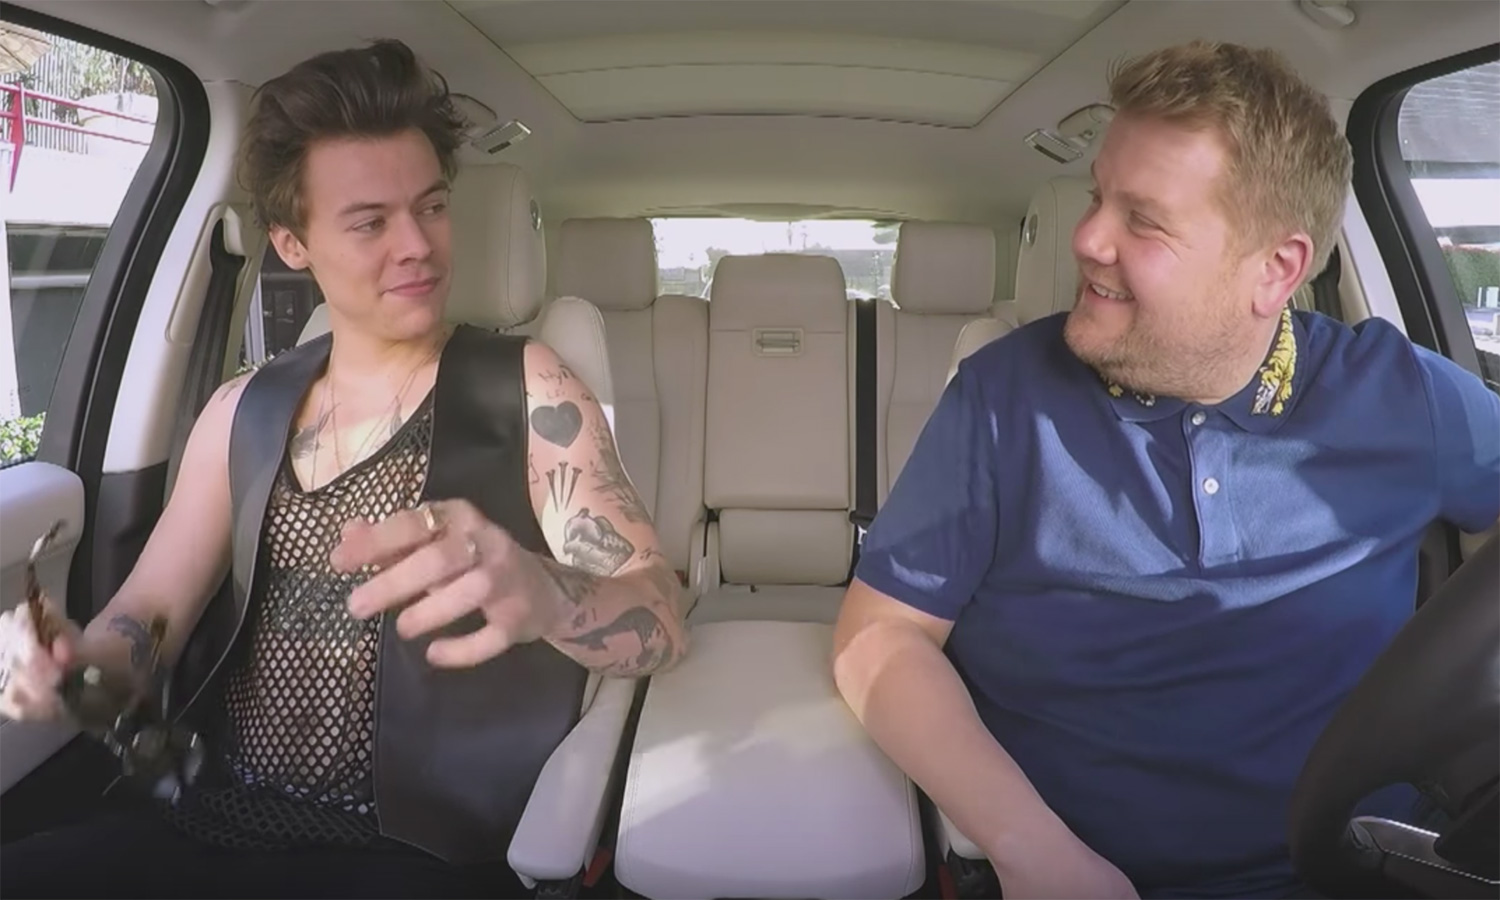 Harry Styles filming a "Carpool Karaoke" segment on "The Late Late Show" with James Corden.